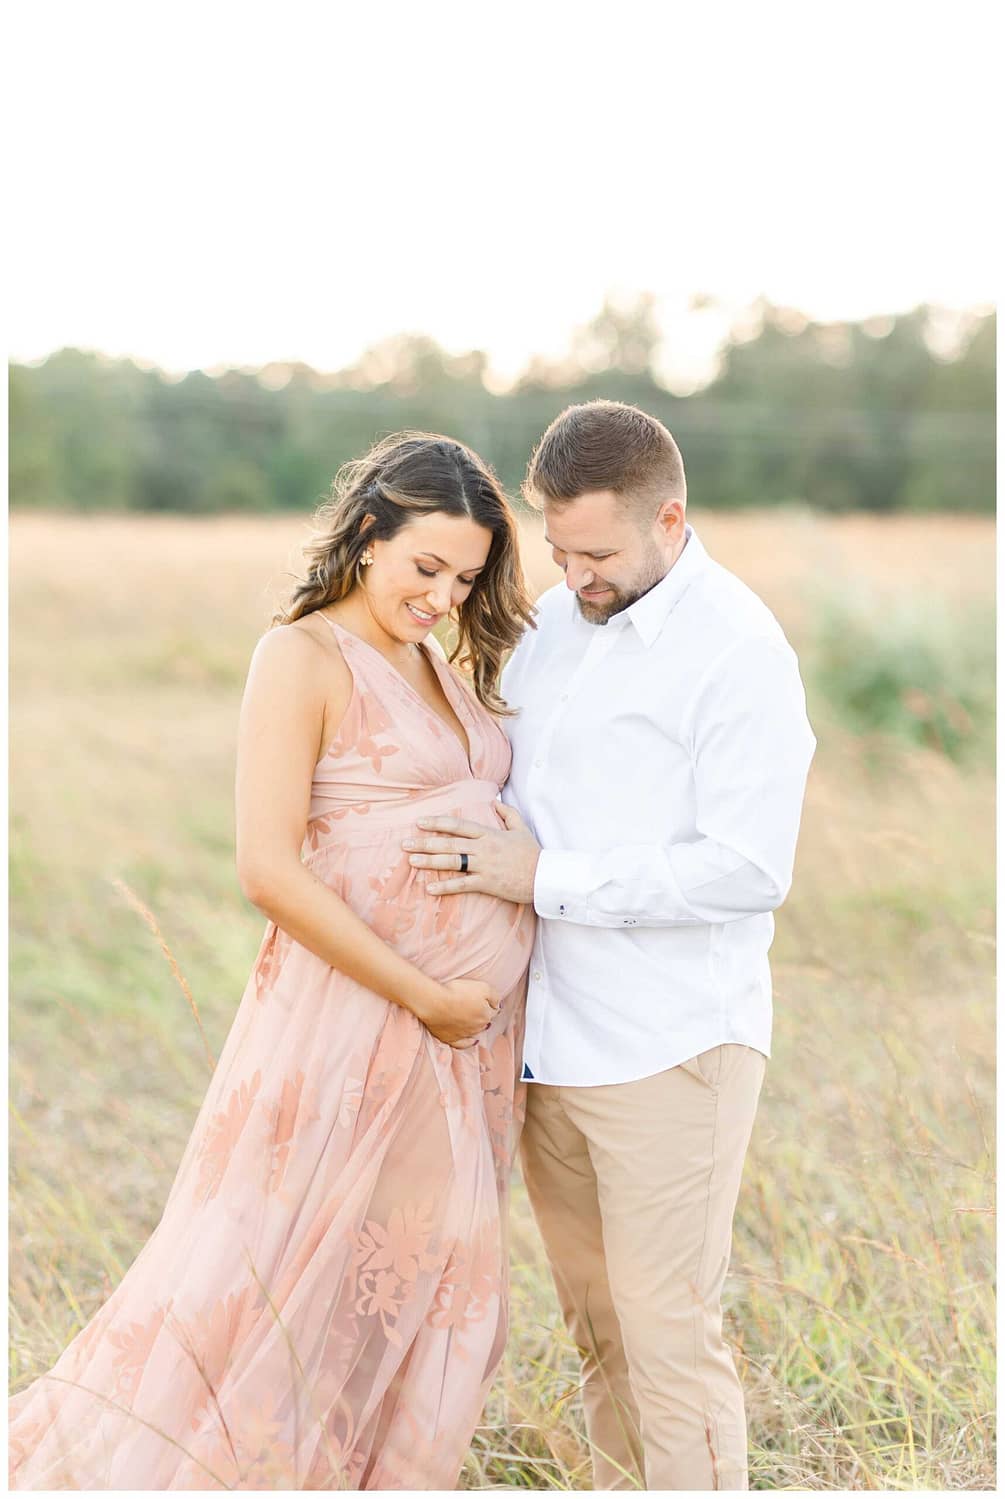 A pregnant mother and her husband holding their pregnant belly outside in a field looking down at the belly by Maternity Photographer DC